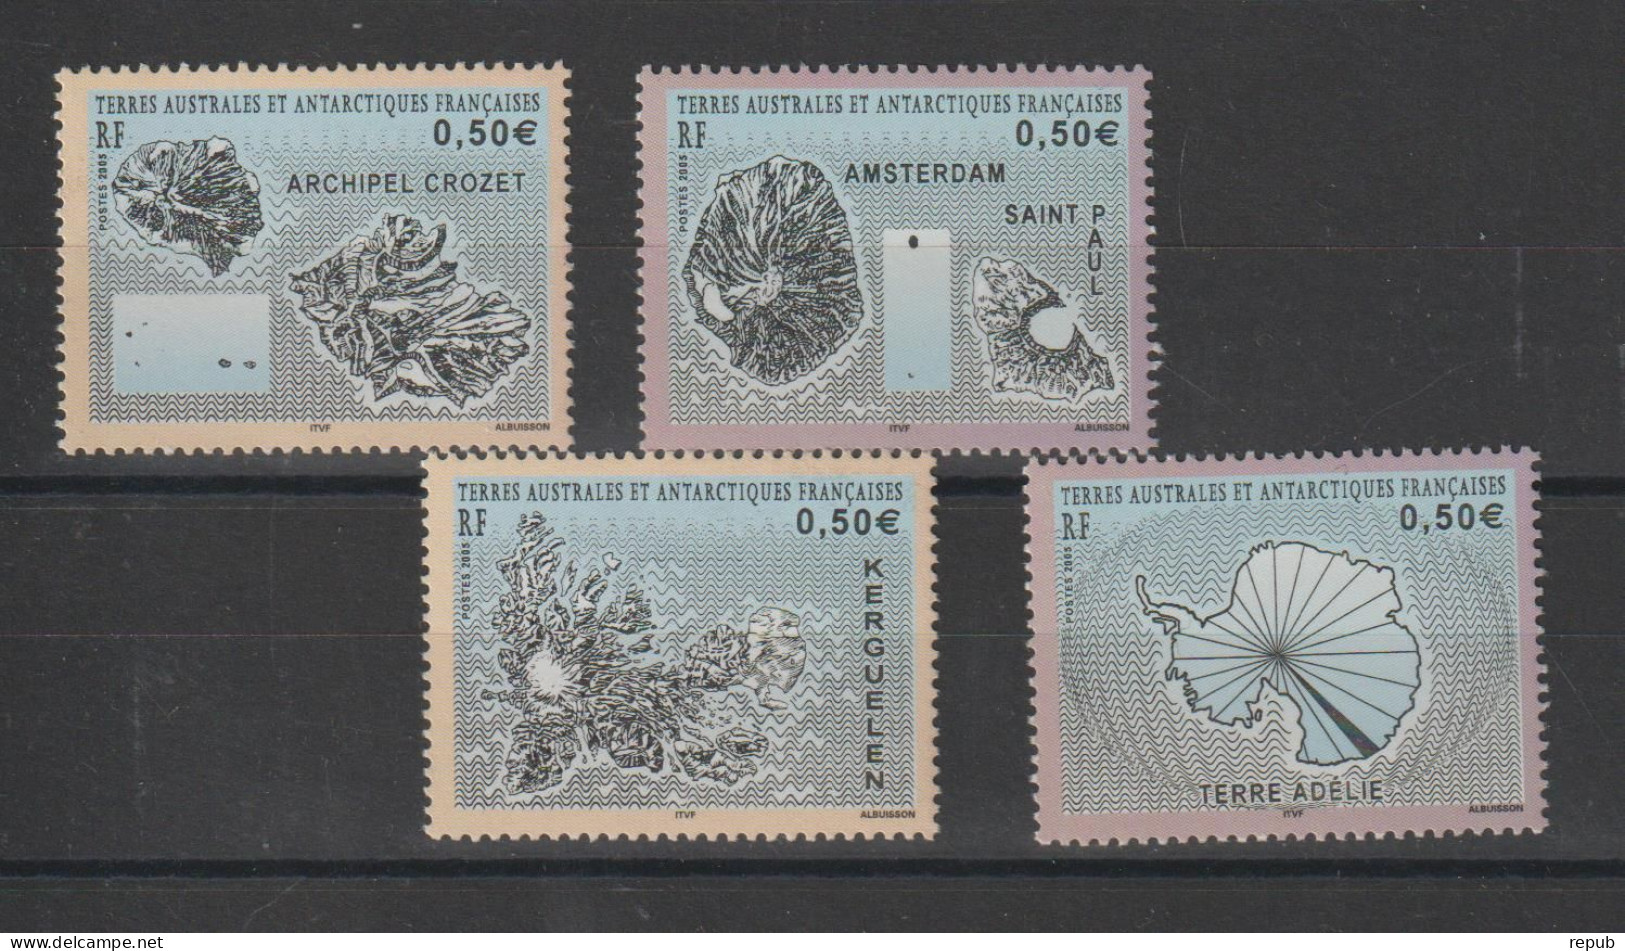 TAAF 2005 Timbres Issus Du BF 13, 431-434, 4 Val ** MNH - Neufs